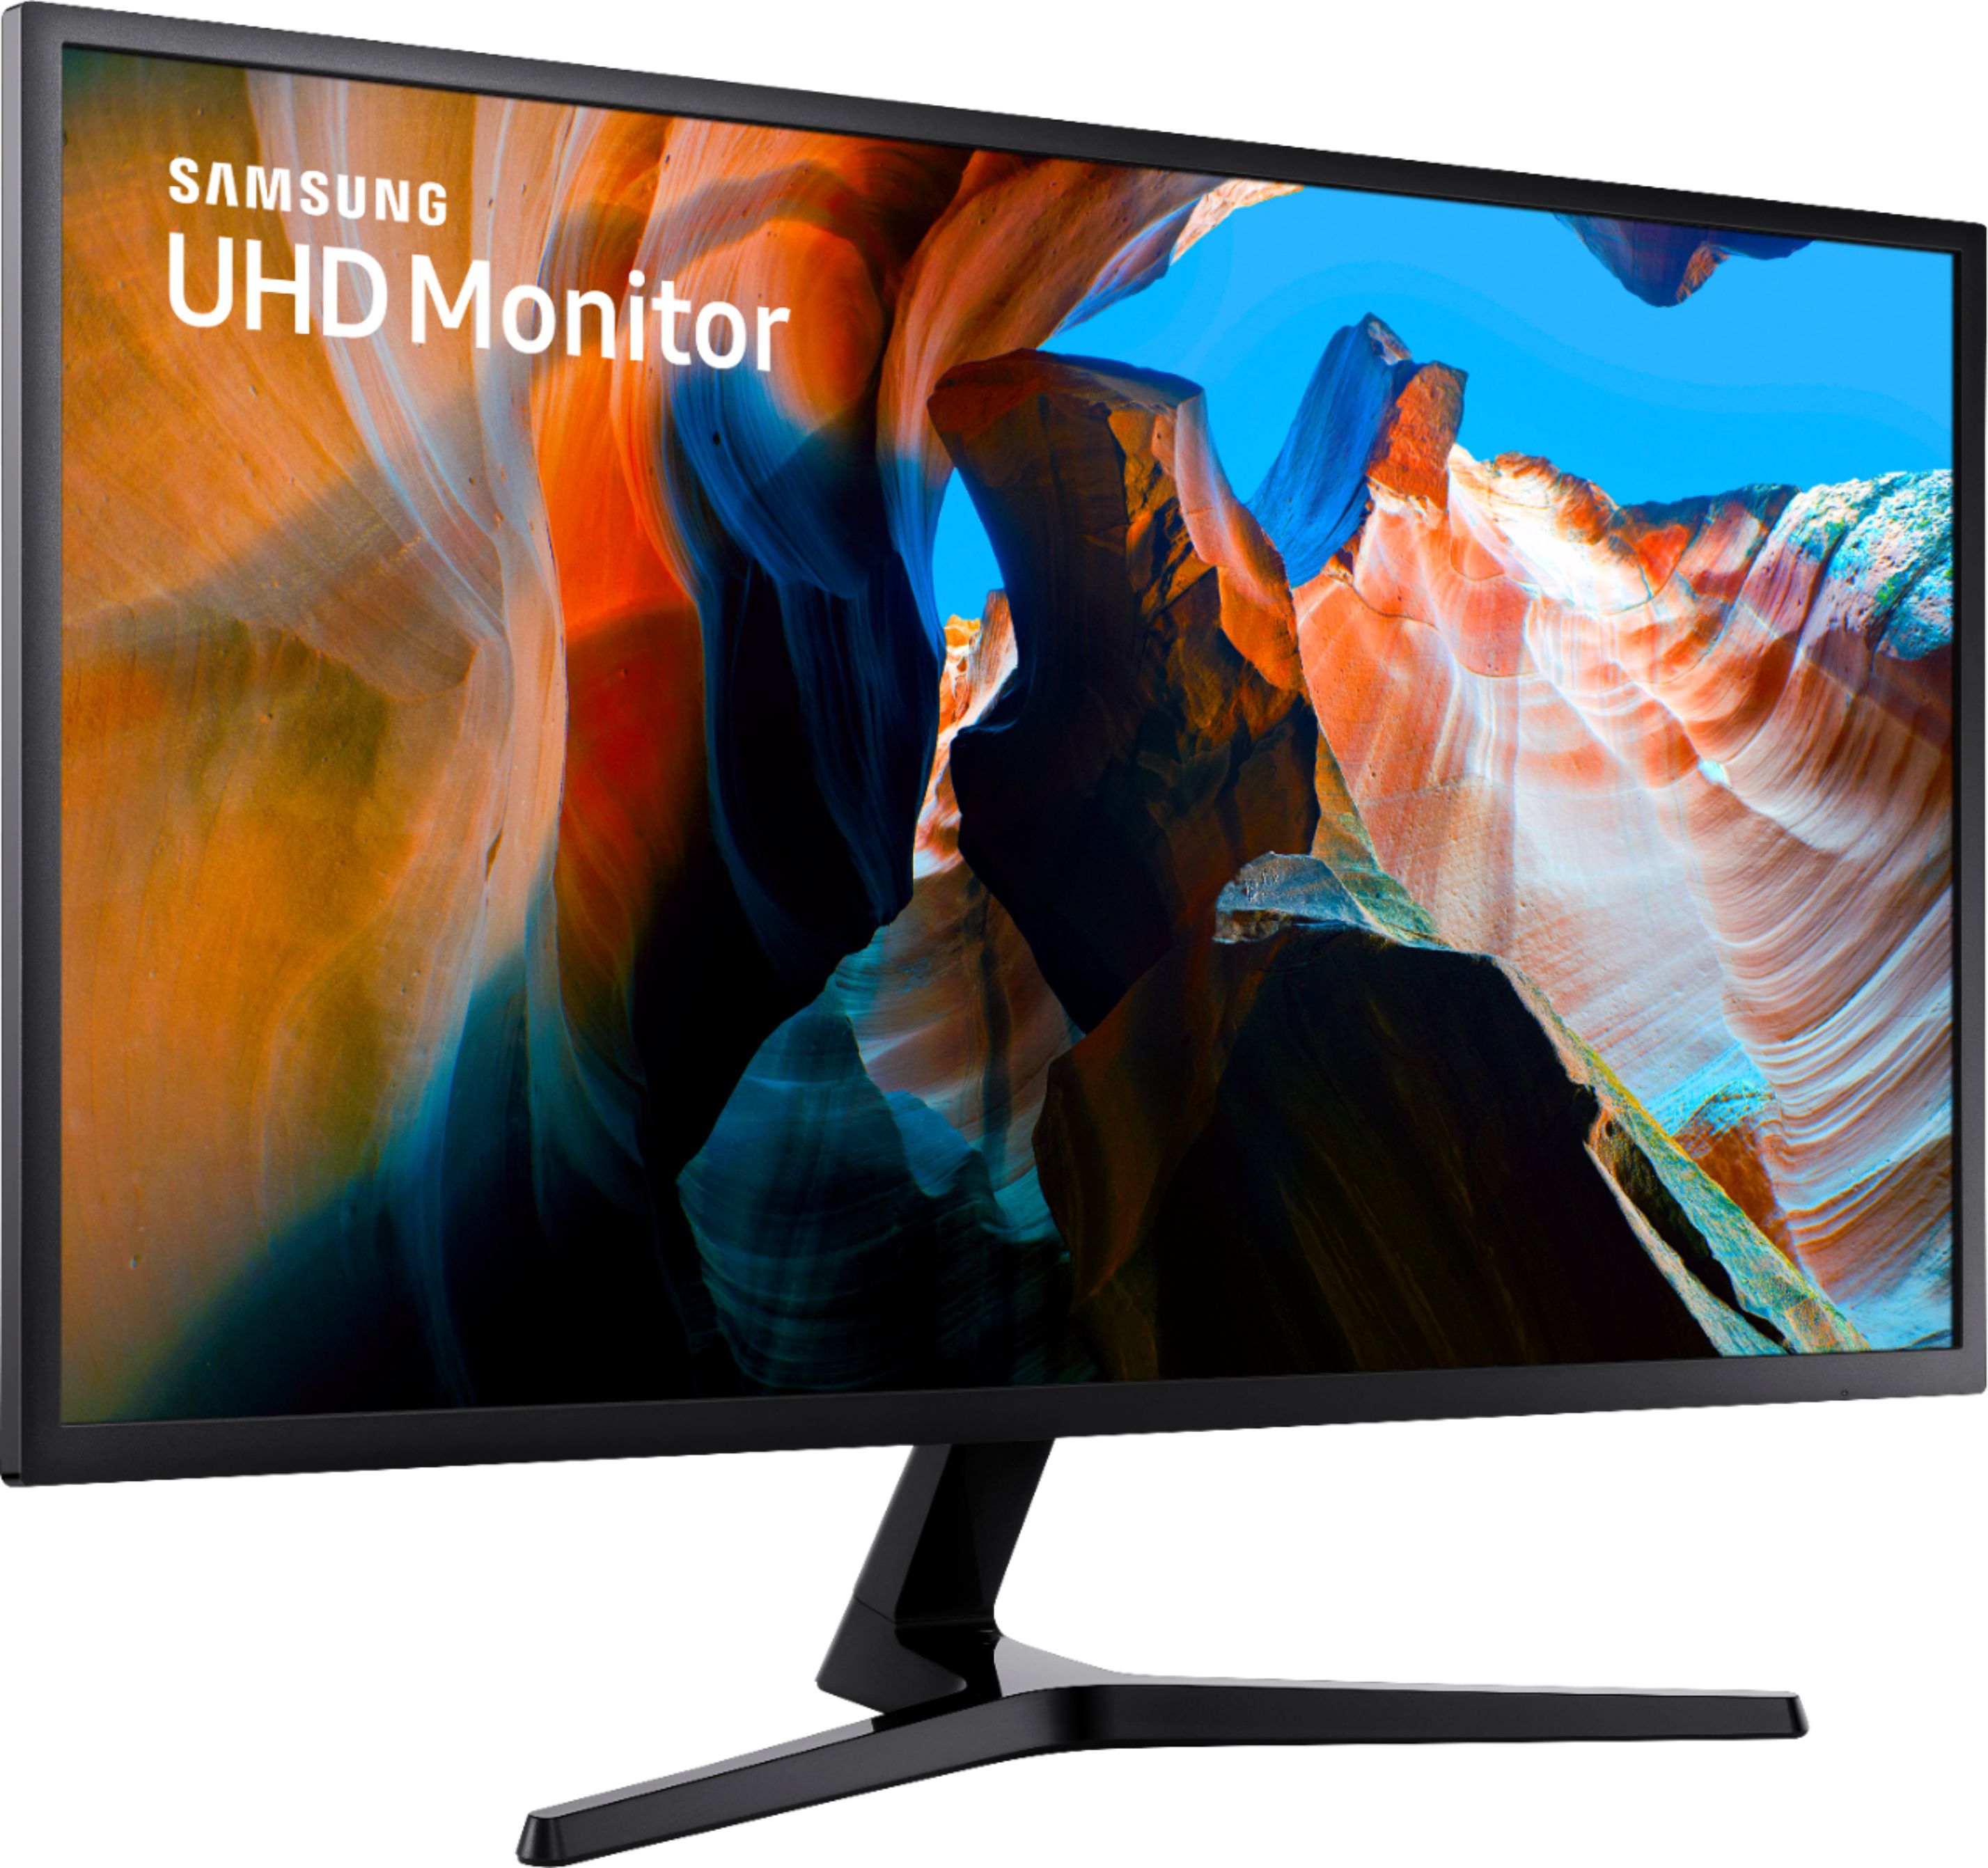 Angle View: Samsung - G77 Series 27" Curved WQHD Gaming Monitor With Special T1 Faker Design (HDMI, USB) - Black